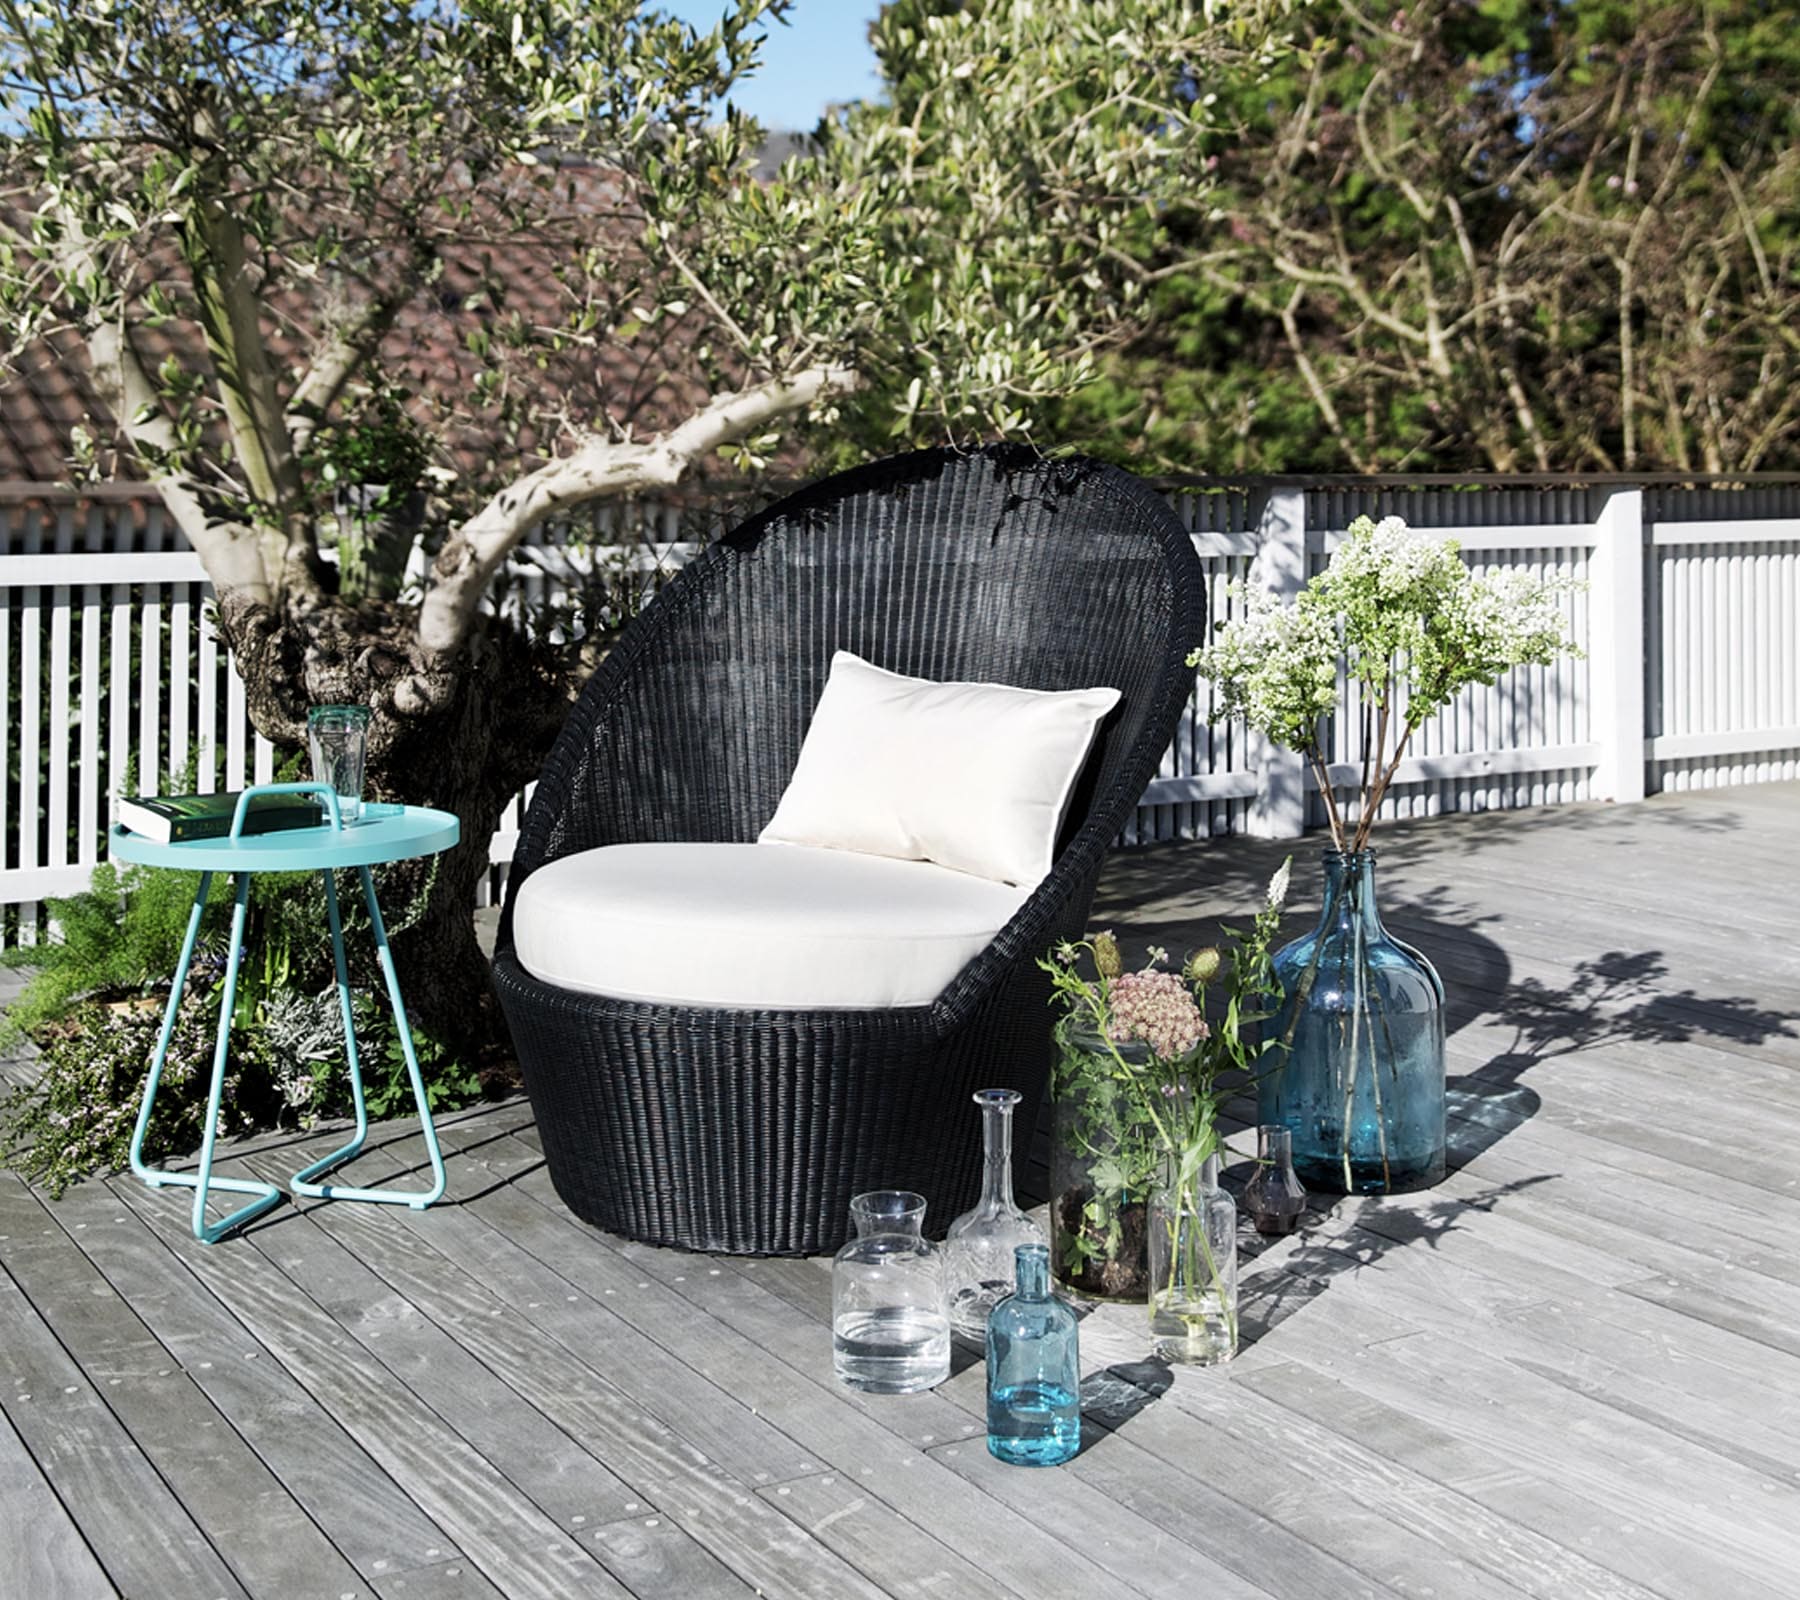 Boxhill's Kingston Sunchair Lounge with Wheels lifestyle image on wooden platform beside of the small tree with small round table and bottle container with plants at the side